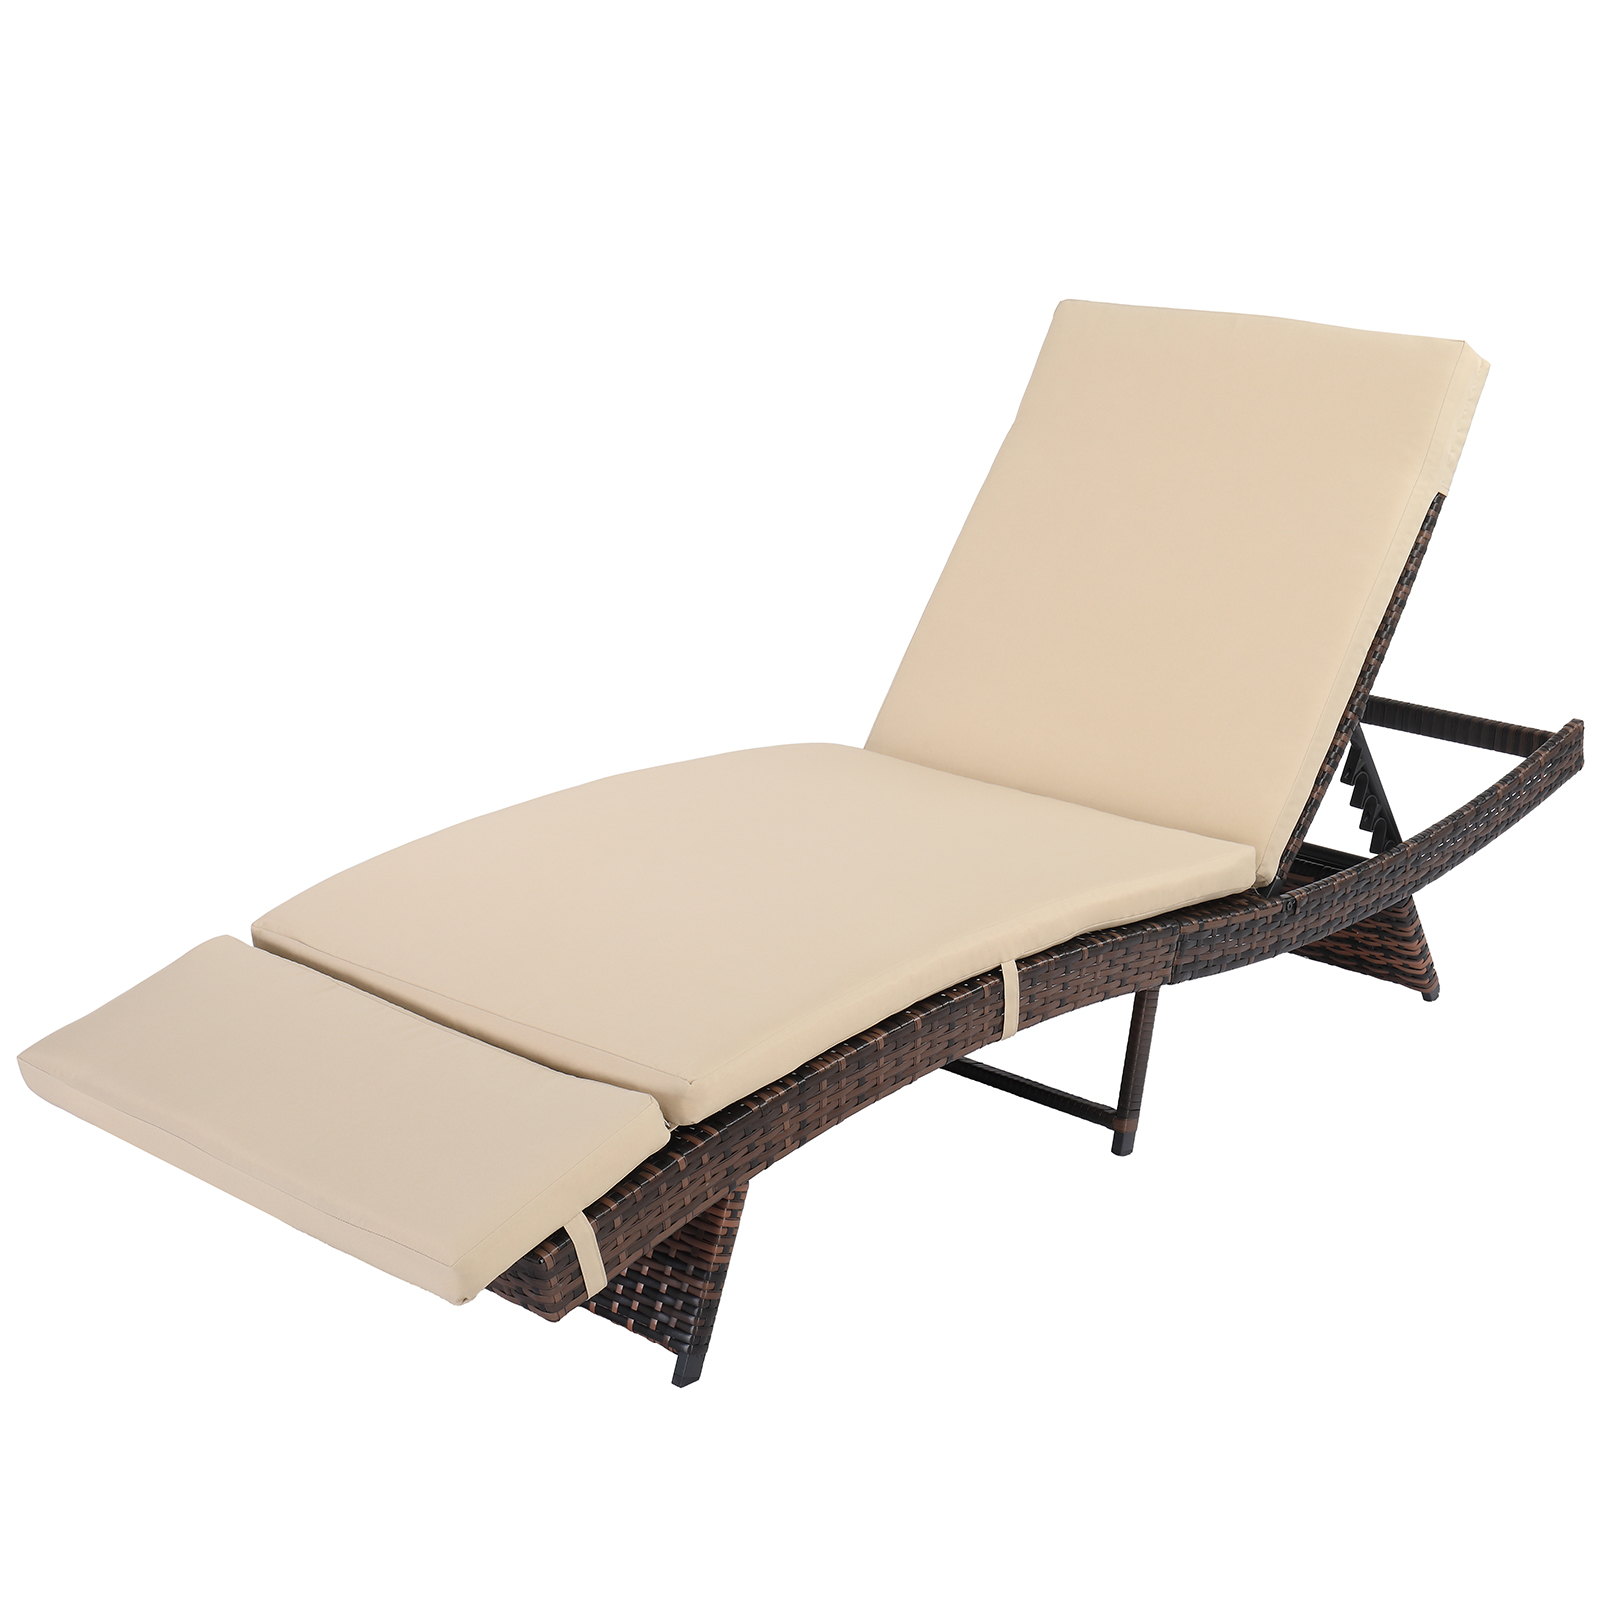 uhomepro Patio Rattan Lounge Chair Chaise Recliner, Outdoor Patio Furniture Set for Pool, Reclining Rattan Lounge Chair Chaise Couch Cushioned with Adjustable Back, Beige - image 1 of 10